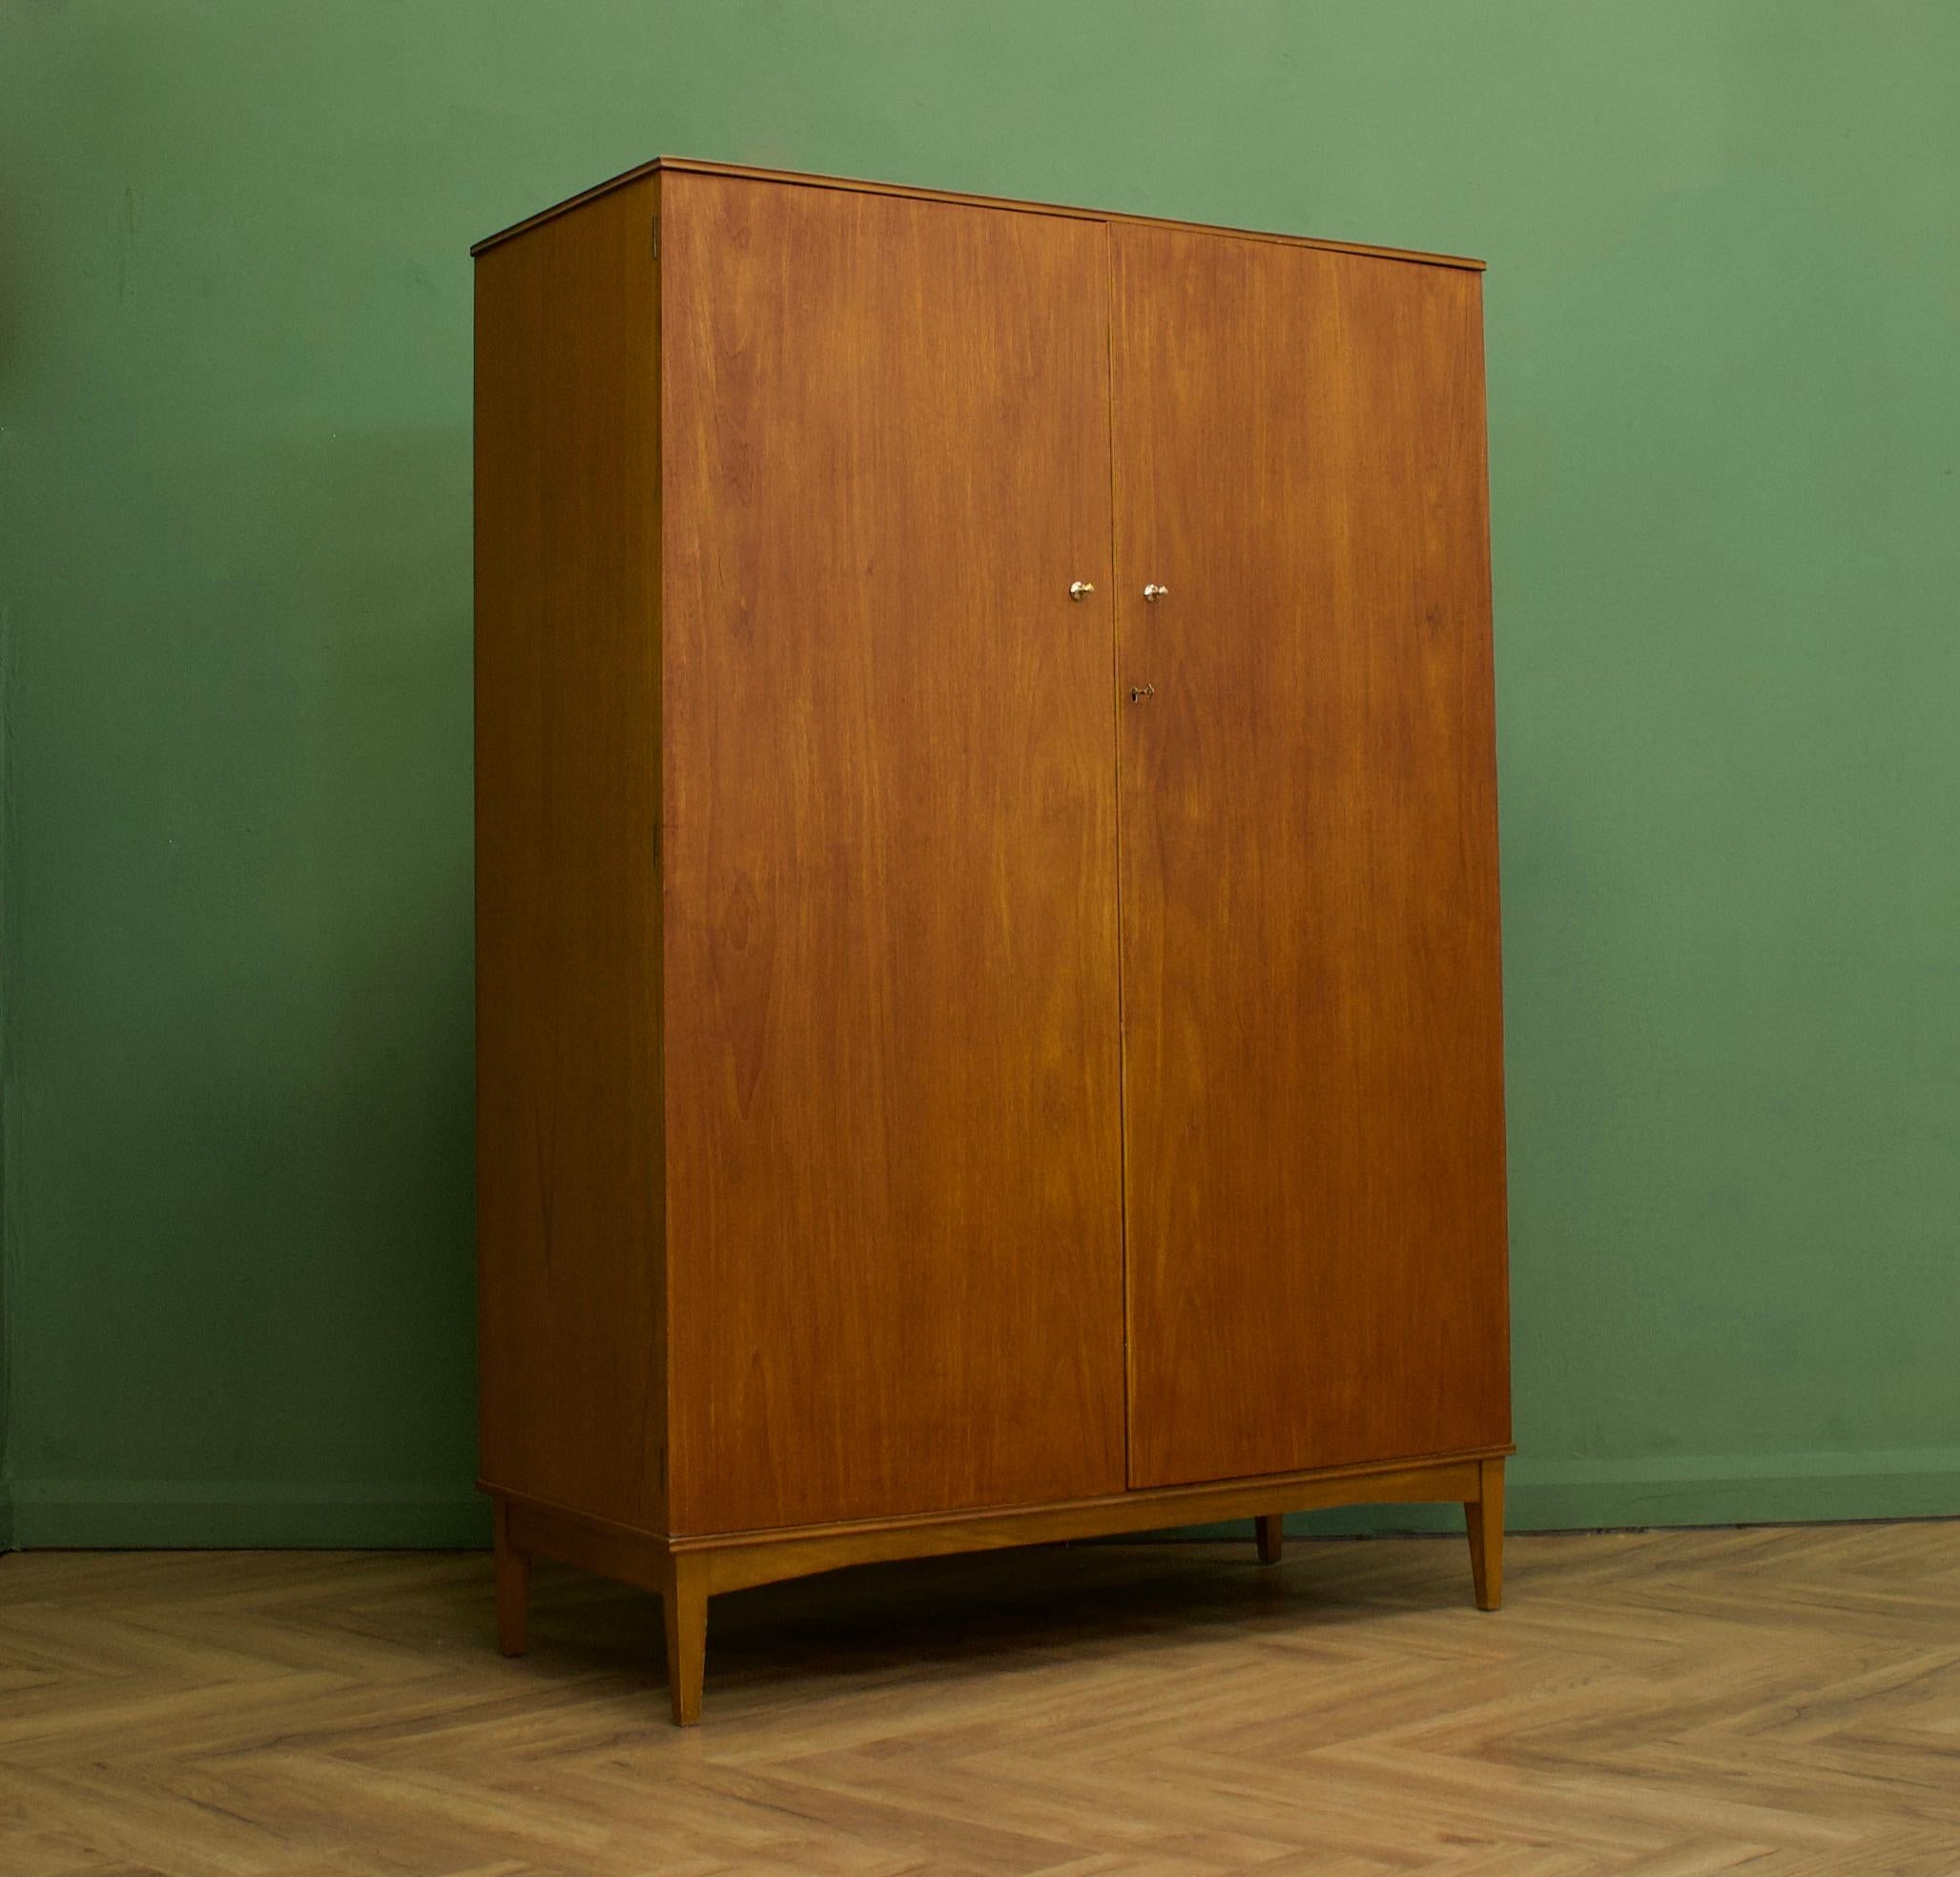 A freestanding double door teak wardrobe in the Danish modern style
Made during the 1960s


Fitted out with two clothes rails and a shelf